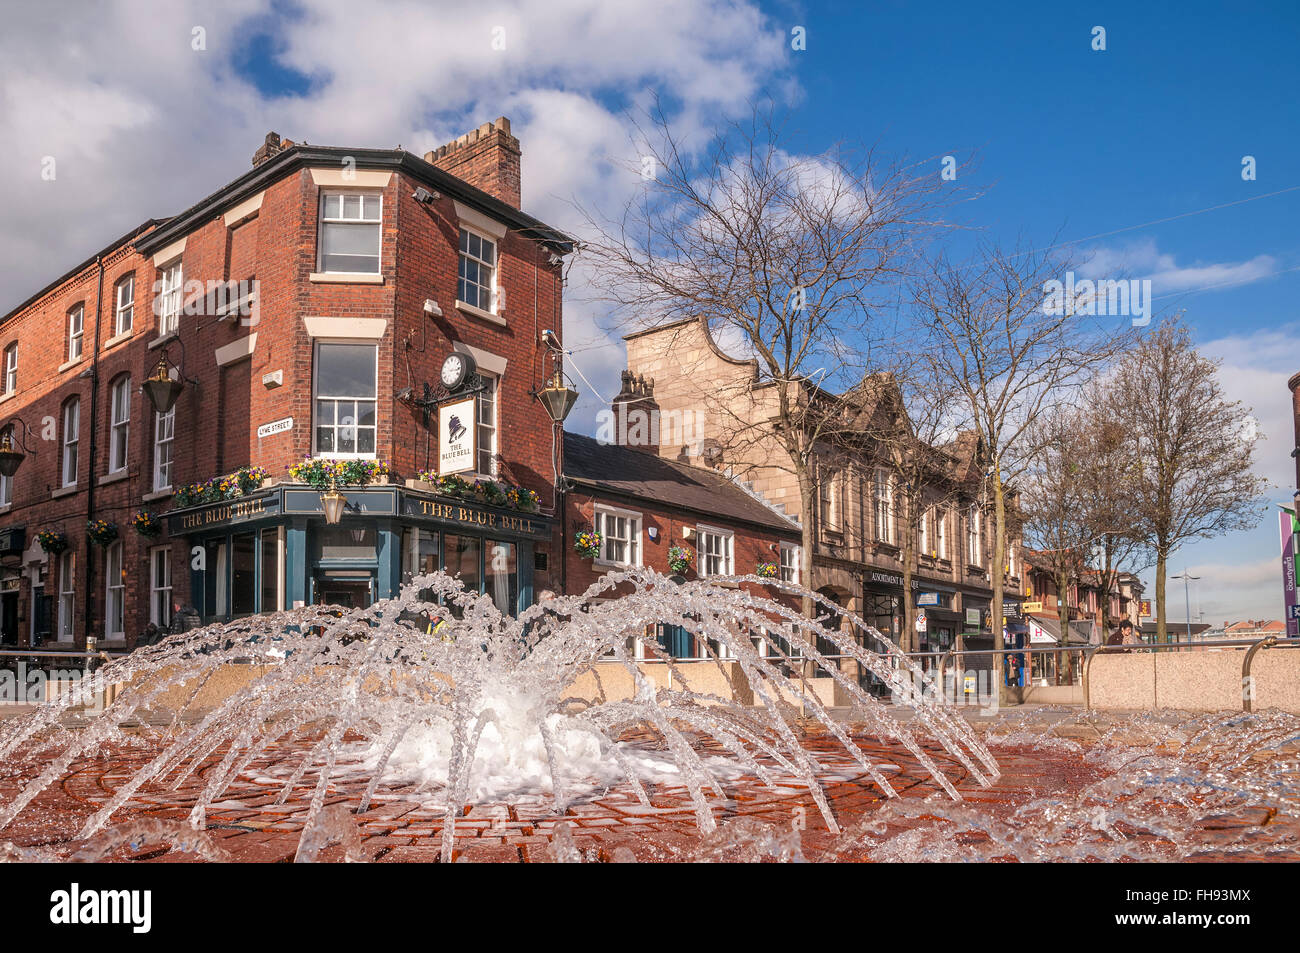 Municipal fountain Winwick street Warrington looking at the Blue Bell pub. Cheshire North West England Stock Photo